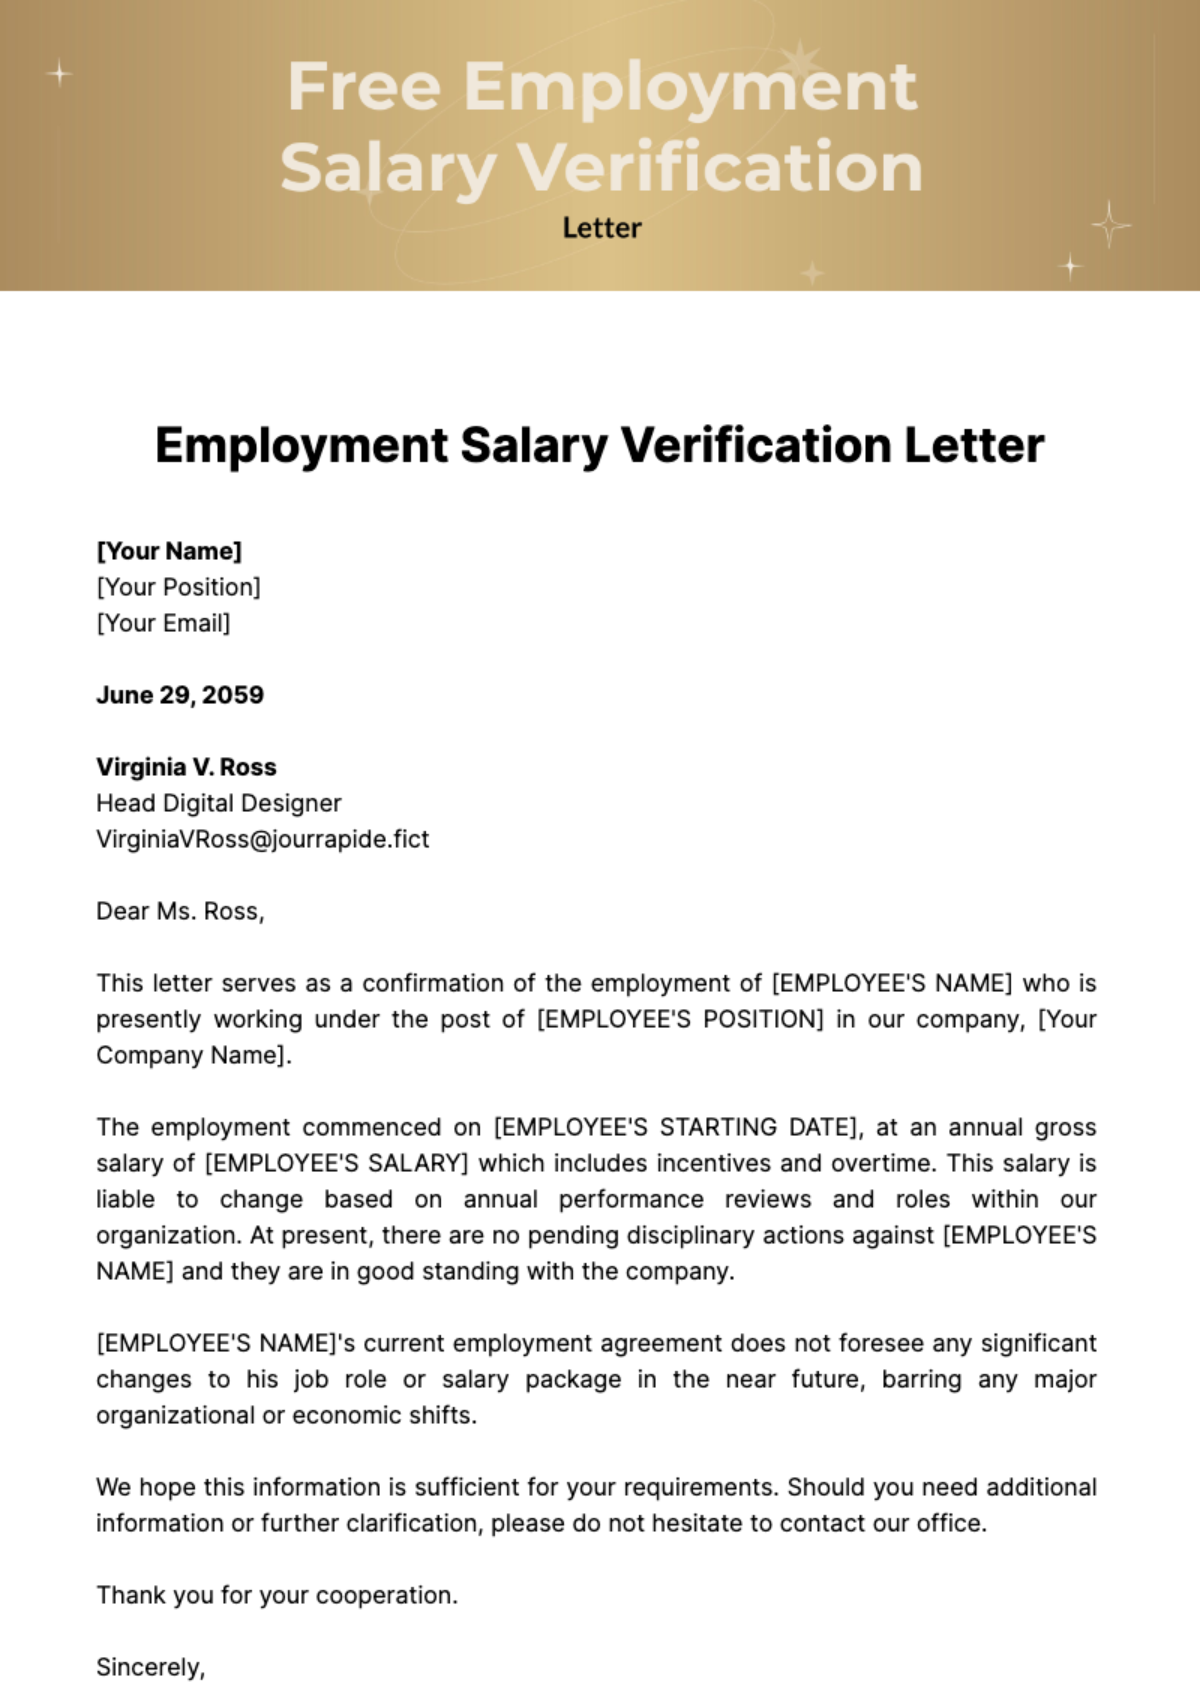 Free Employment Salary Verification Letter Template